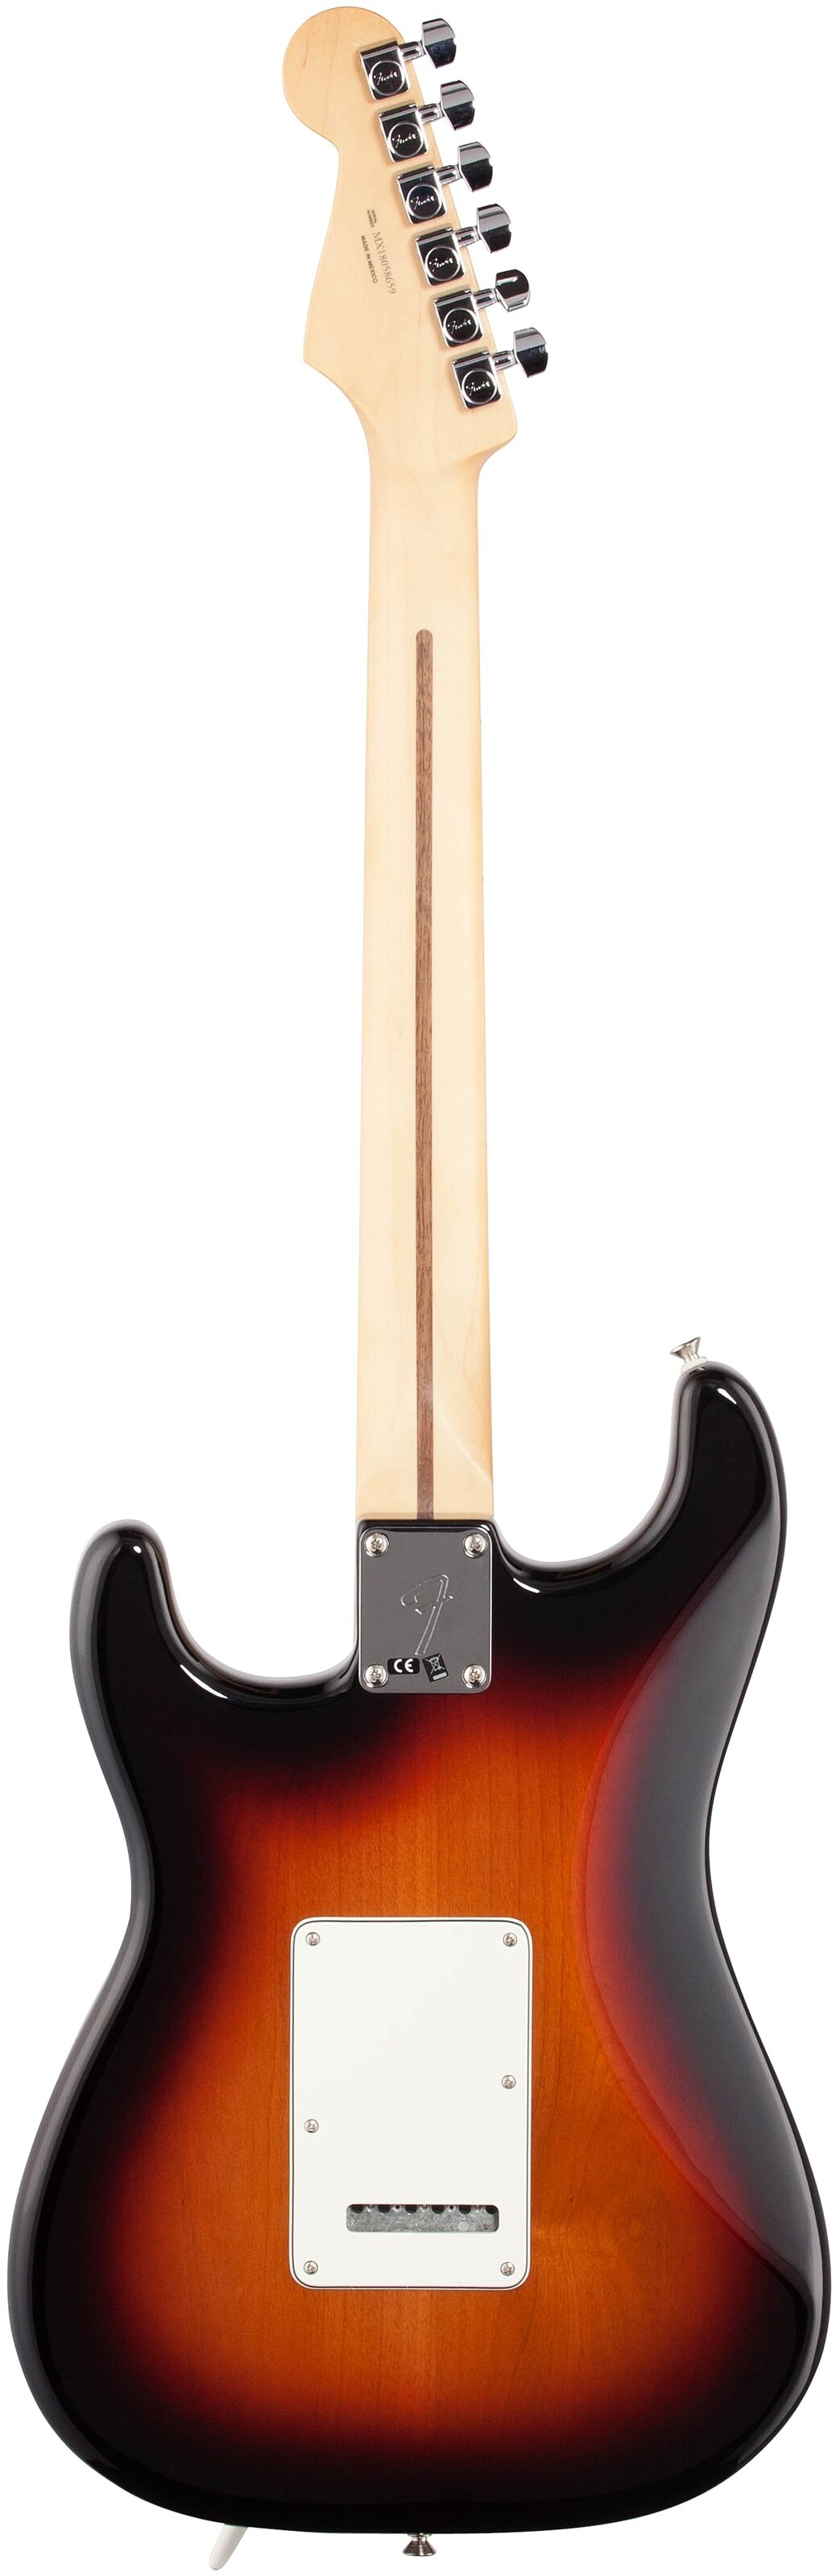 Fender Player Stratocaster Electric Guitar (Maple Fingerboard)